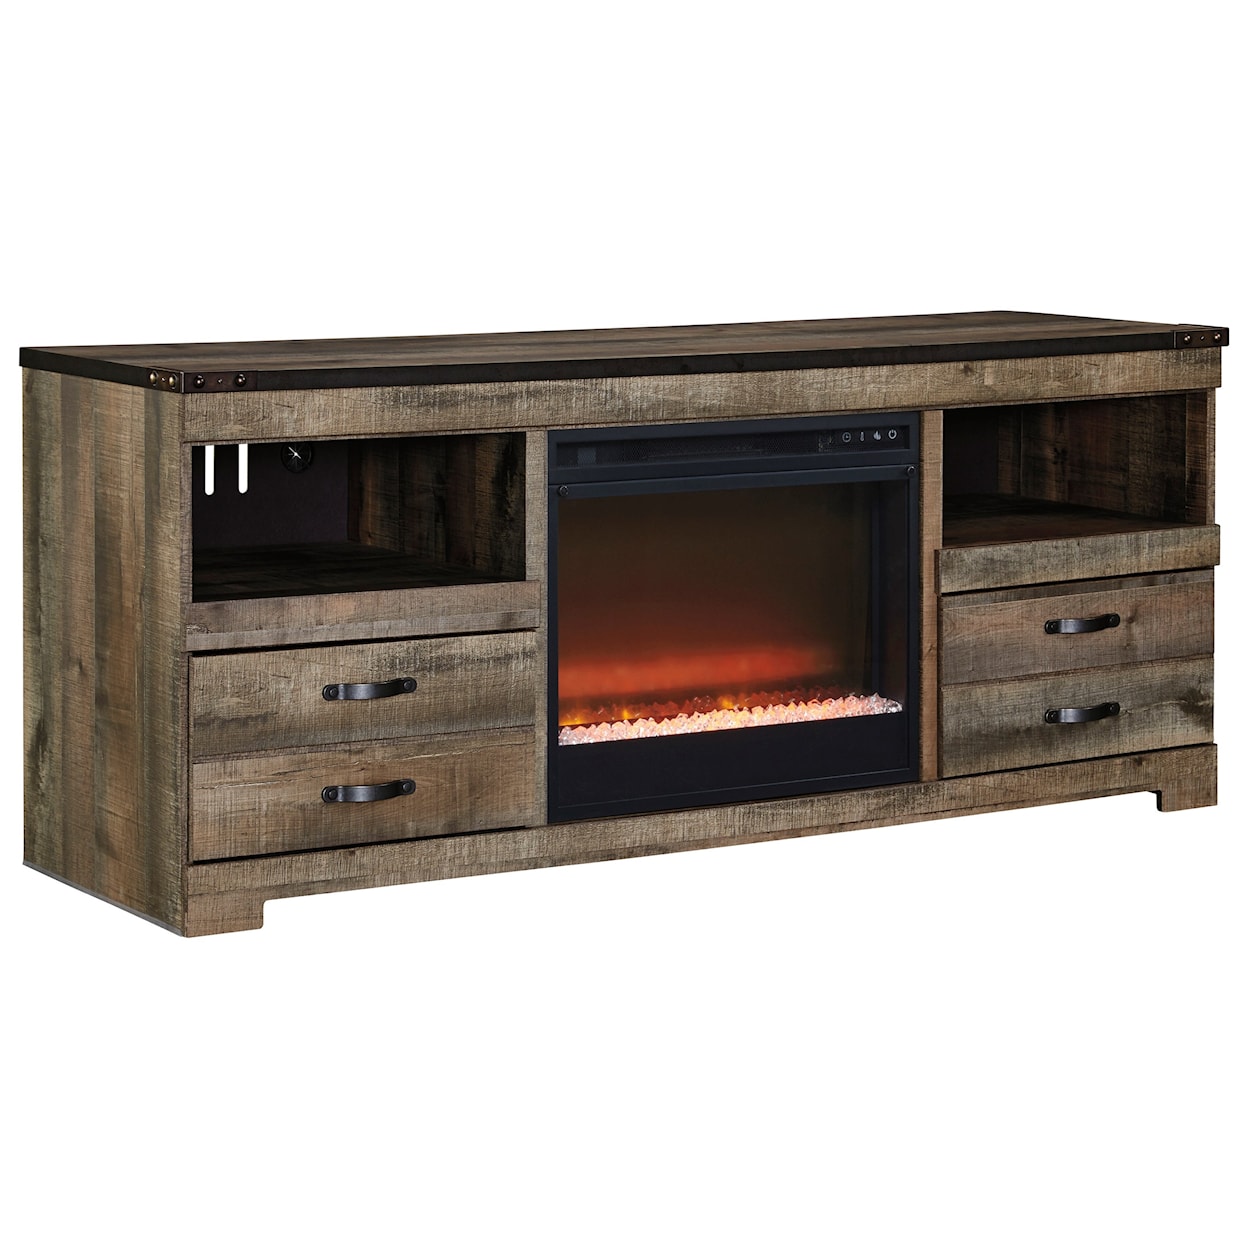 Signature Design by Ashley Vickers Large TV Stand with Fireplace Insert